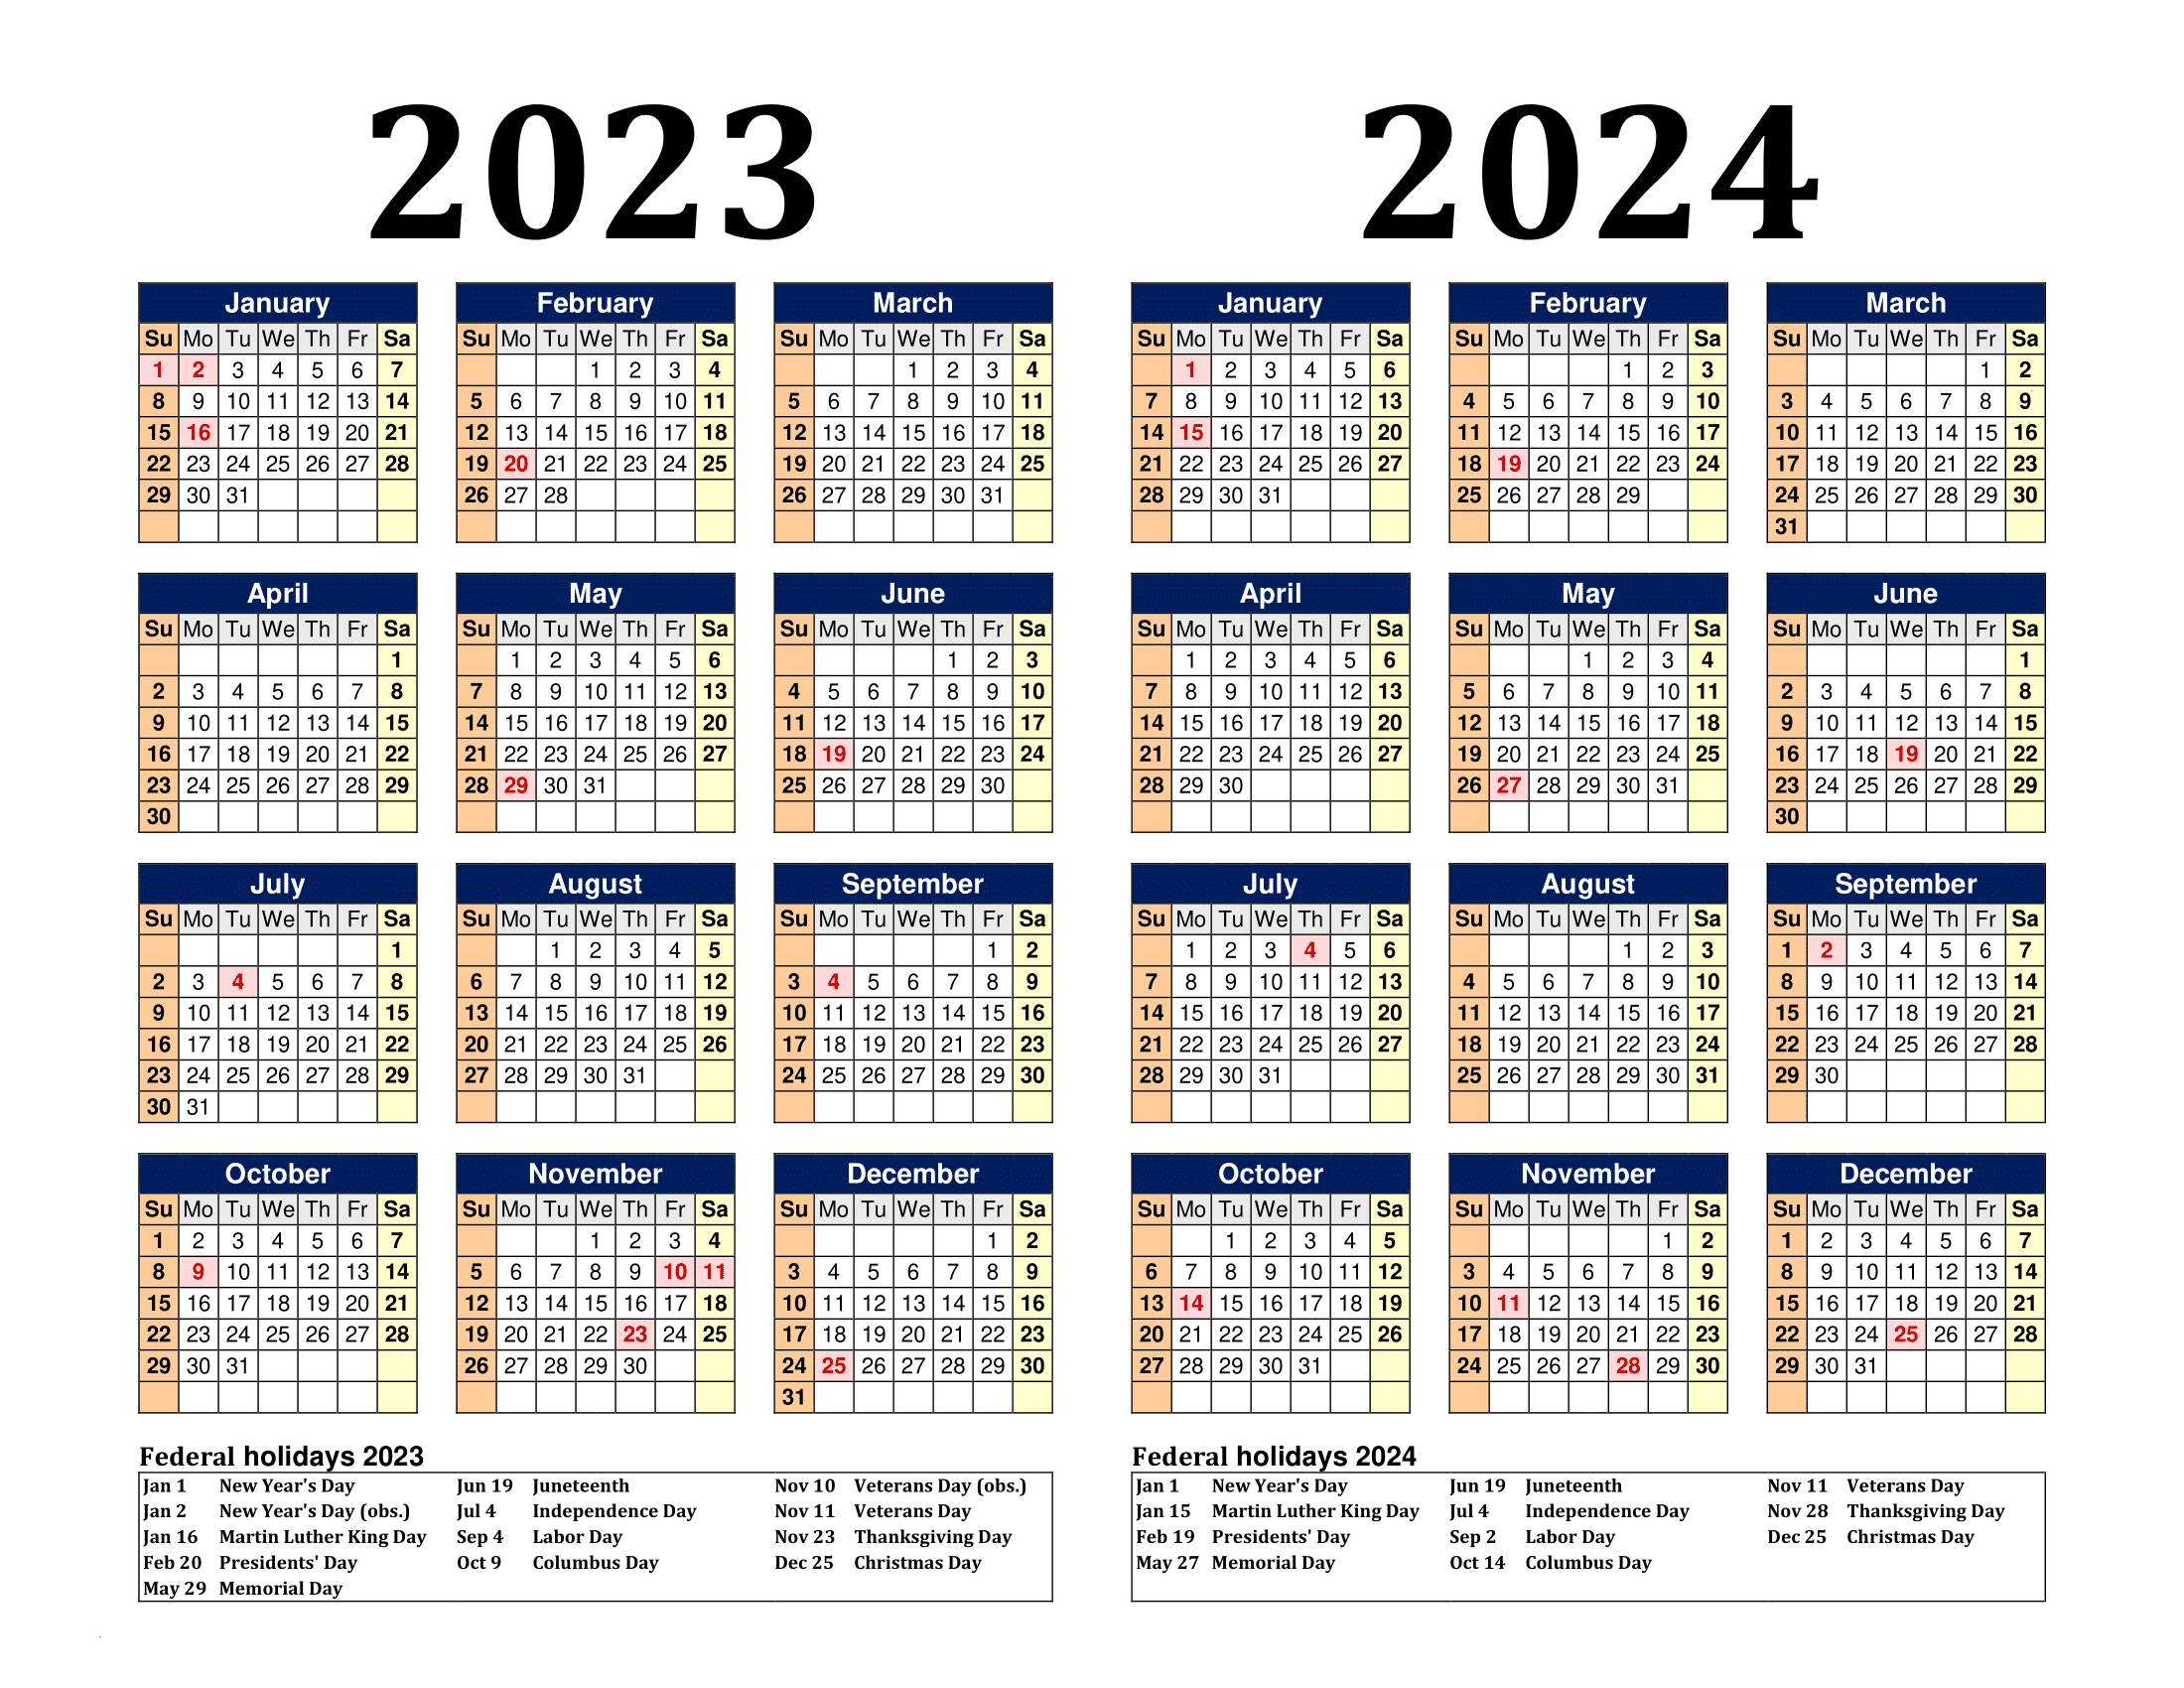 Free Printable Two Year Calendar Templates For 2023 And 2024 In Pdf | Yearly Calendar 2023 And 2024